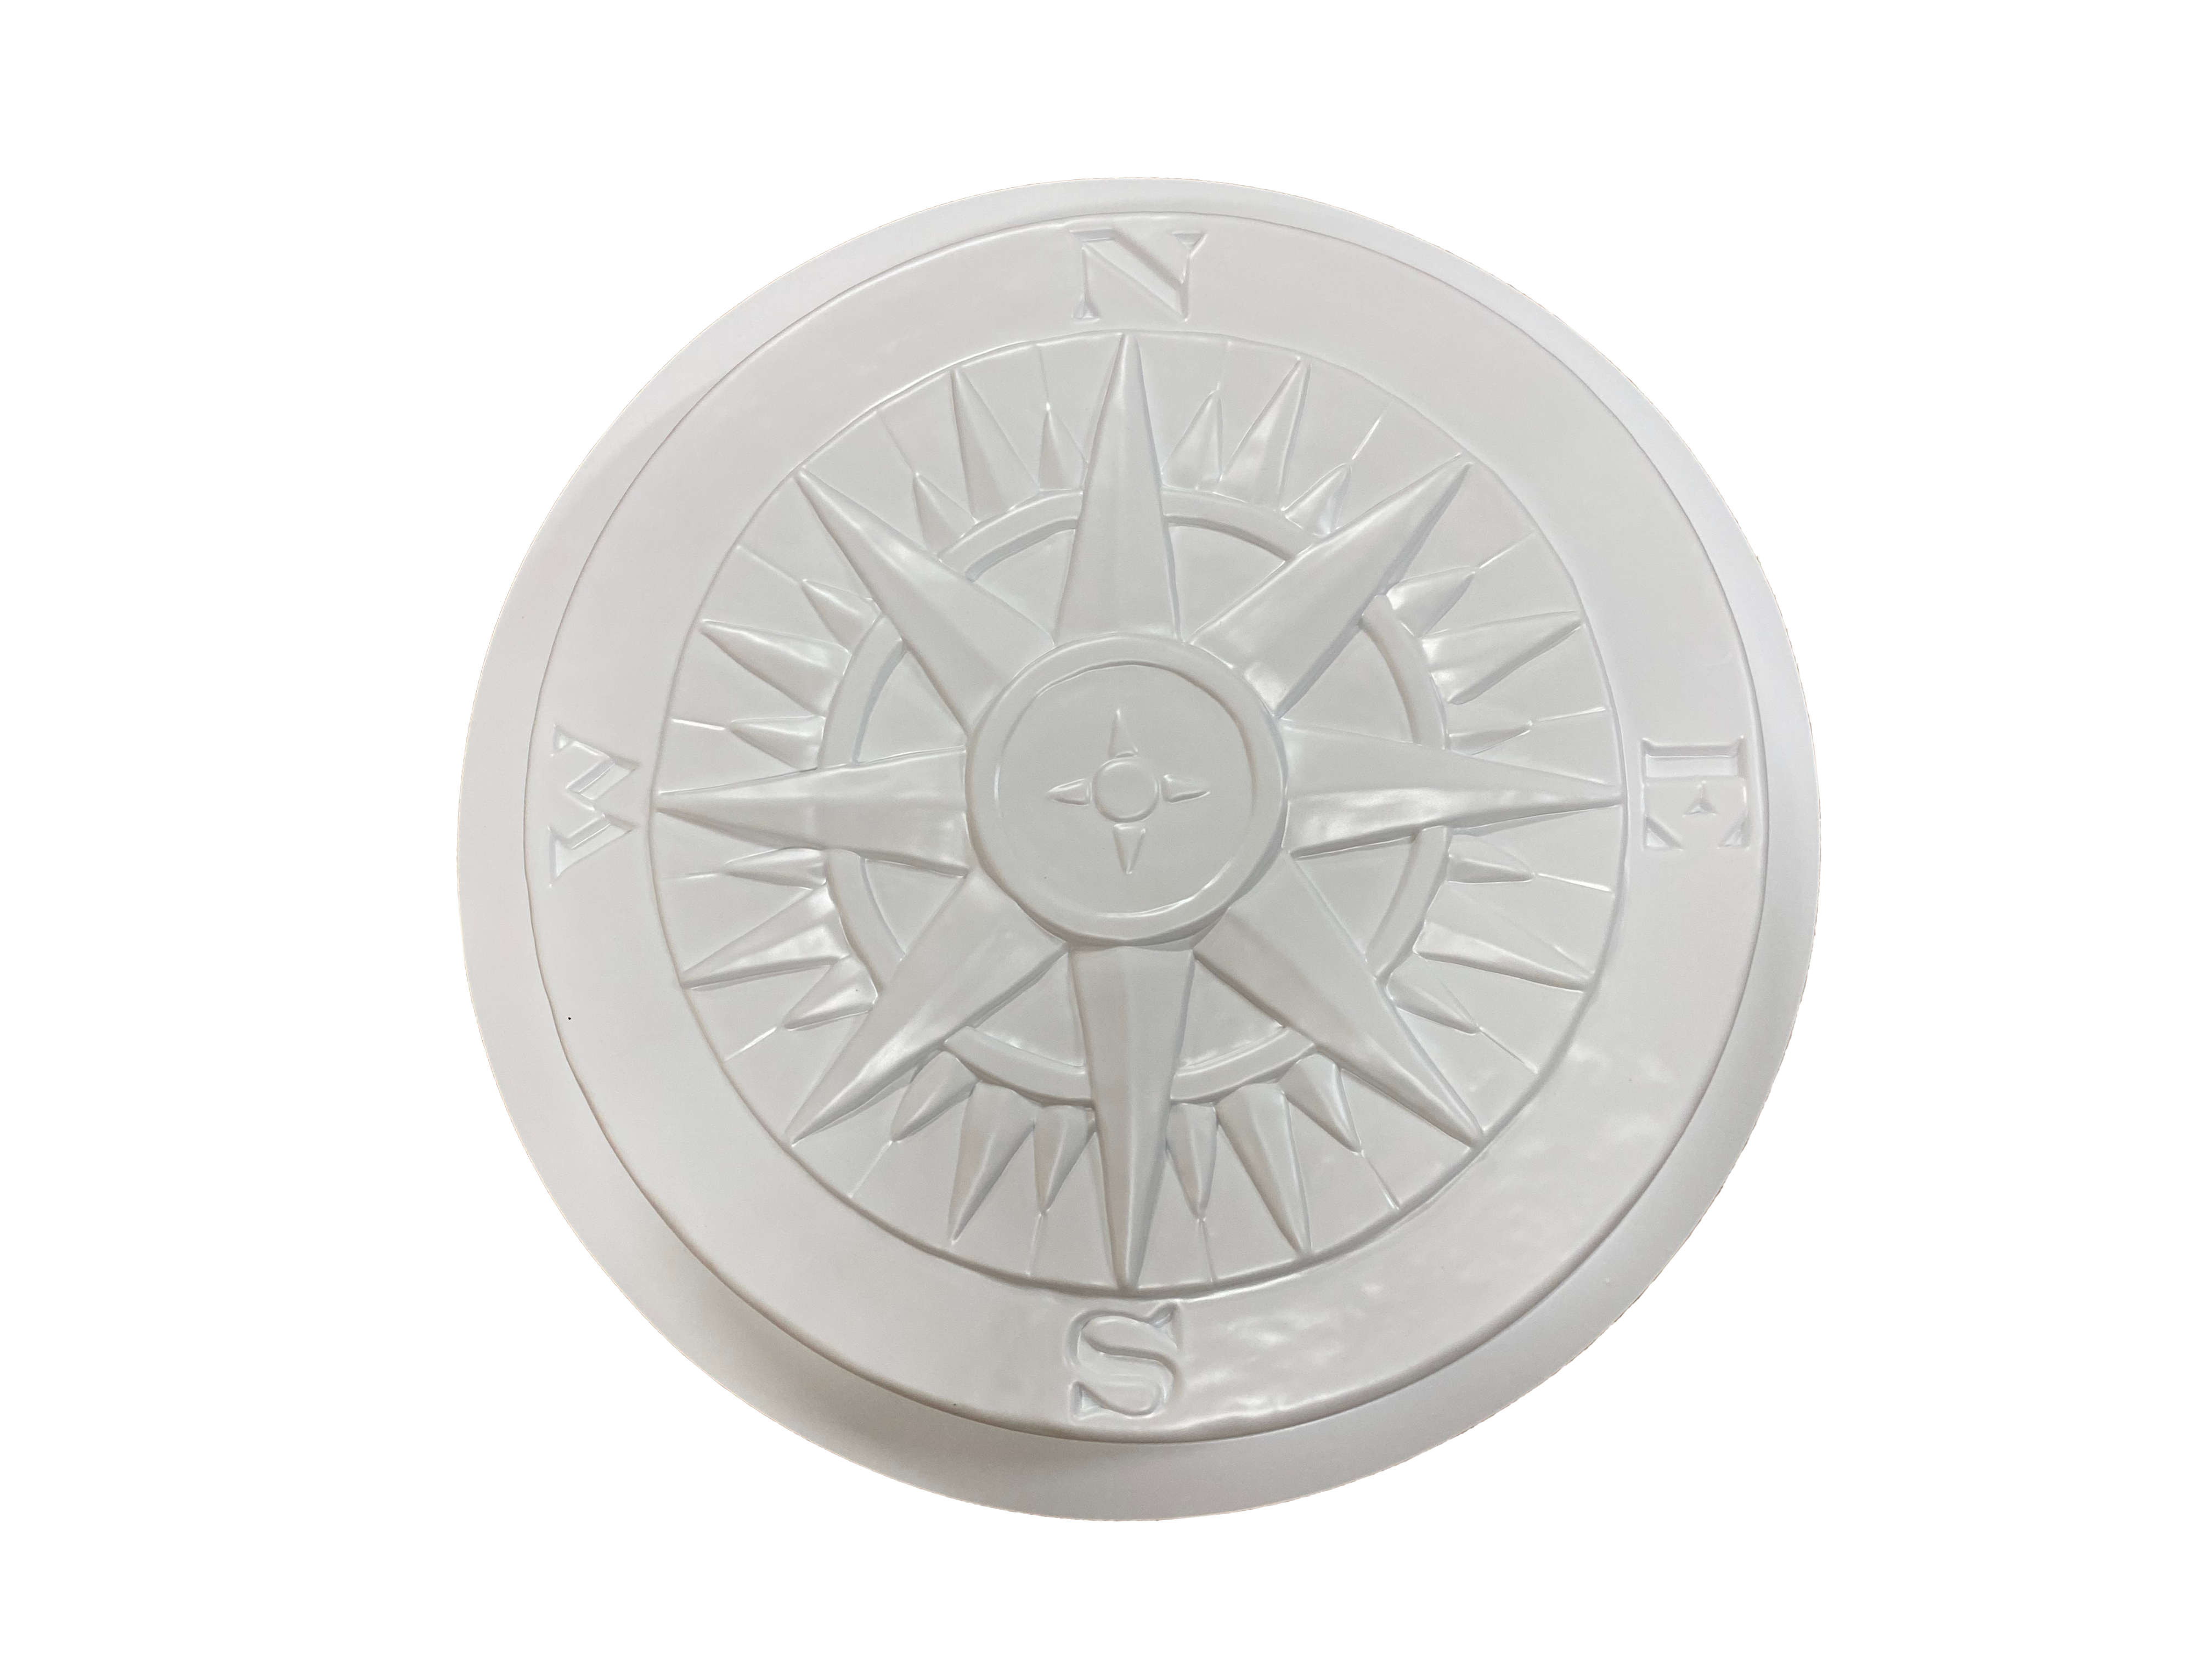 2+1 Free Compass Stepping Stone Concrete Molds 18x2 Make For About $2.00  Each- STEPPING STONE MOLDS